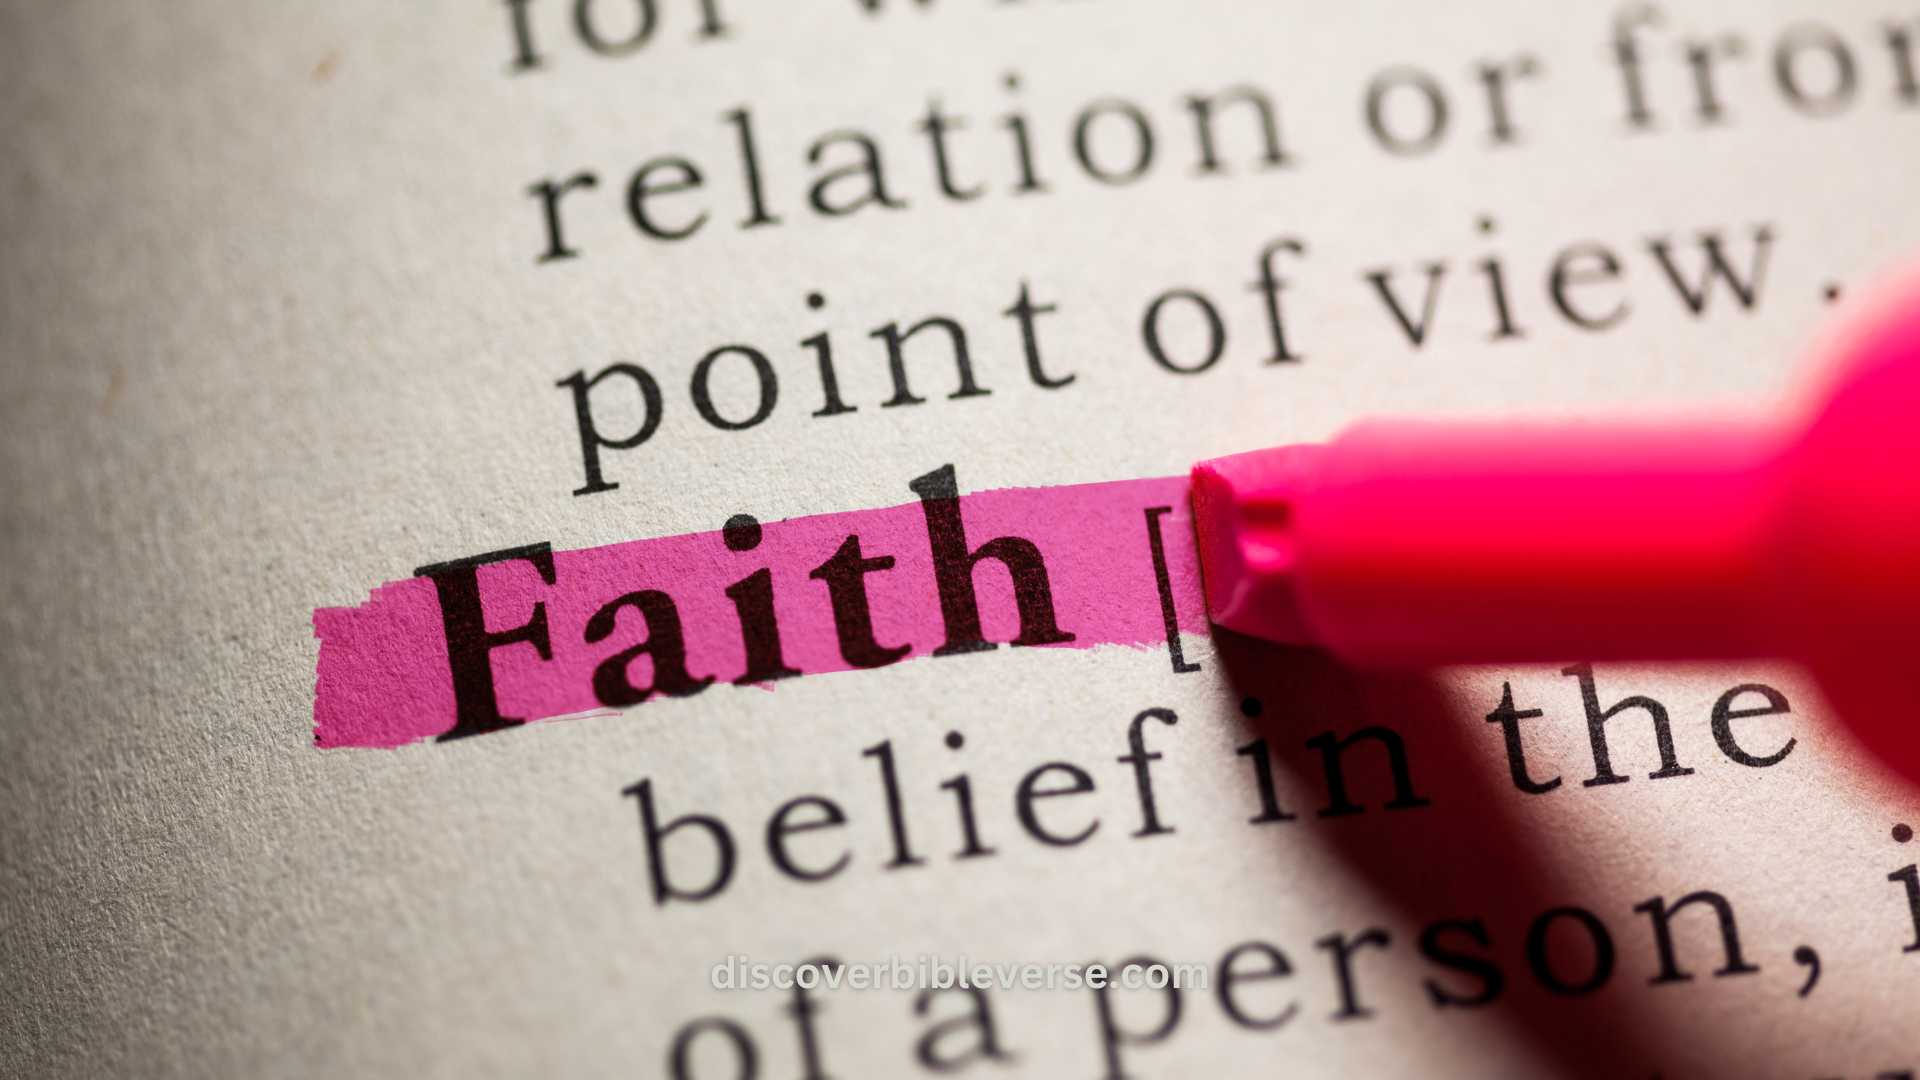 how many times is faith mentioned in the bible